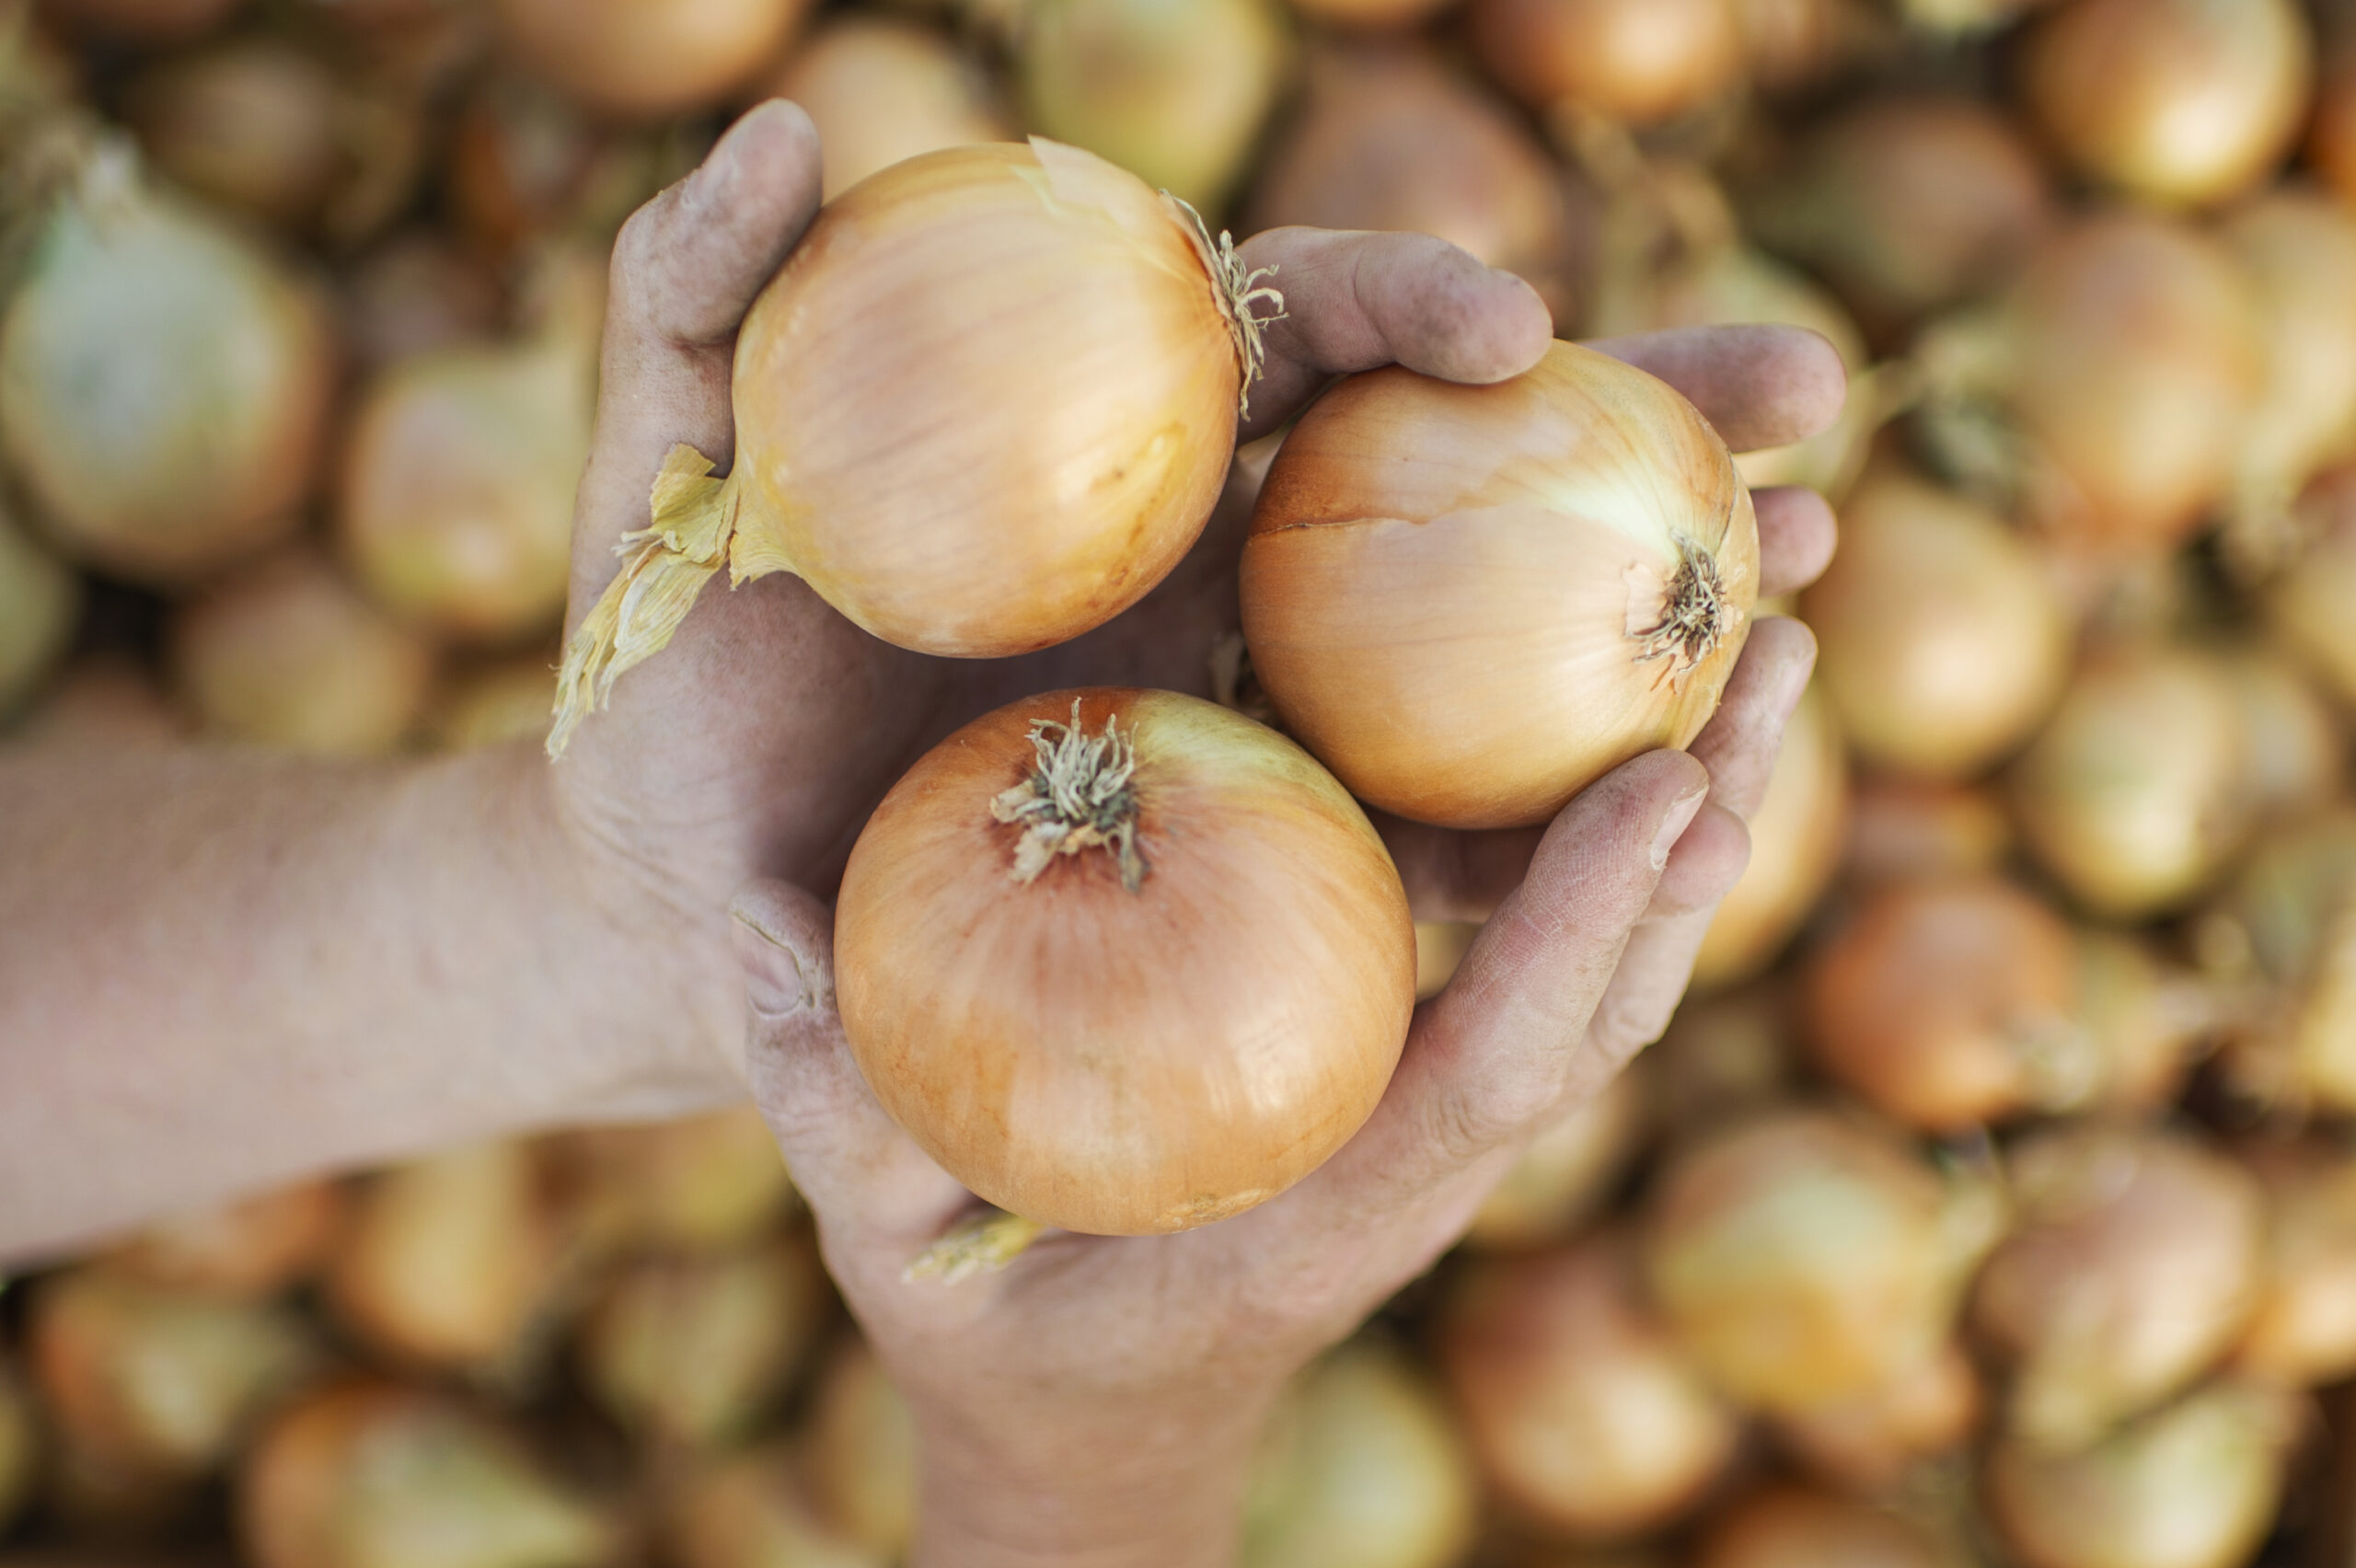 Where To Buy Onions In Bulk